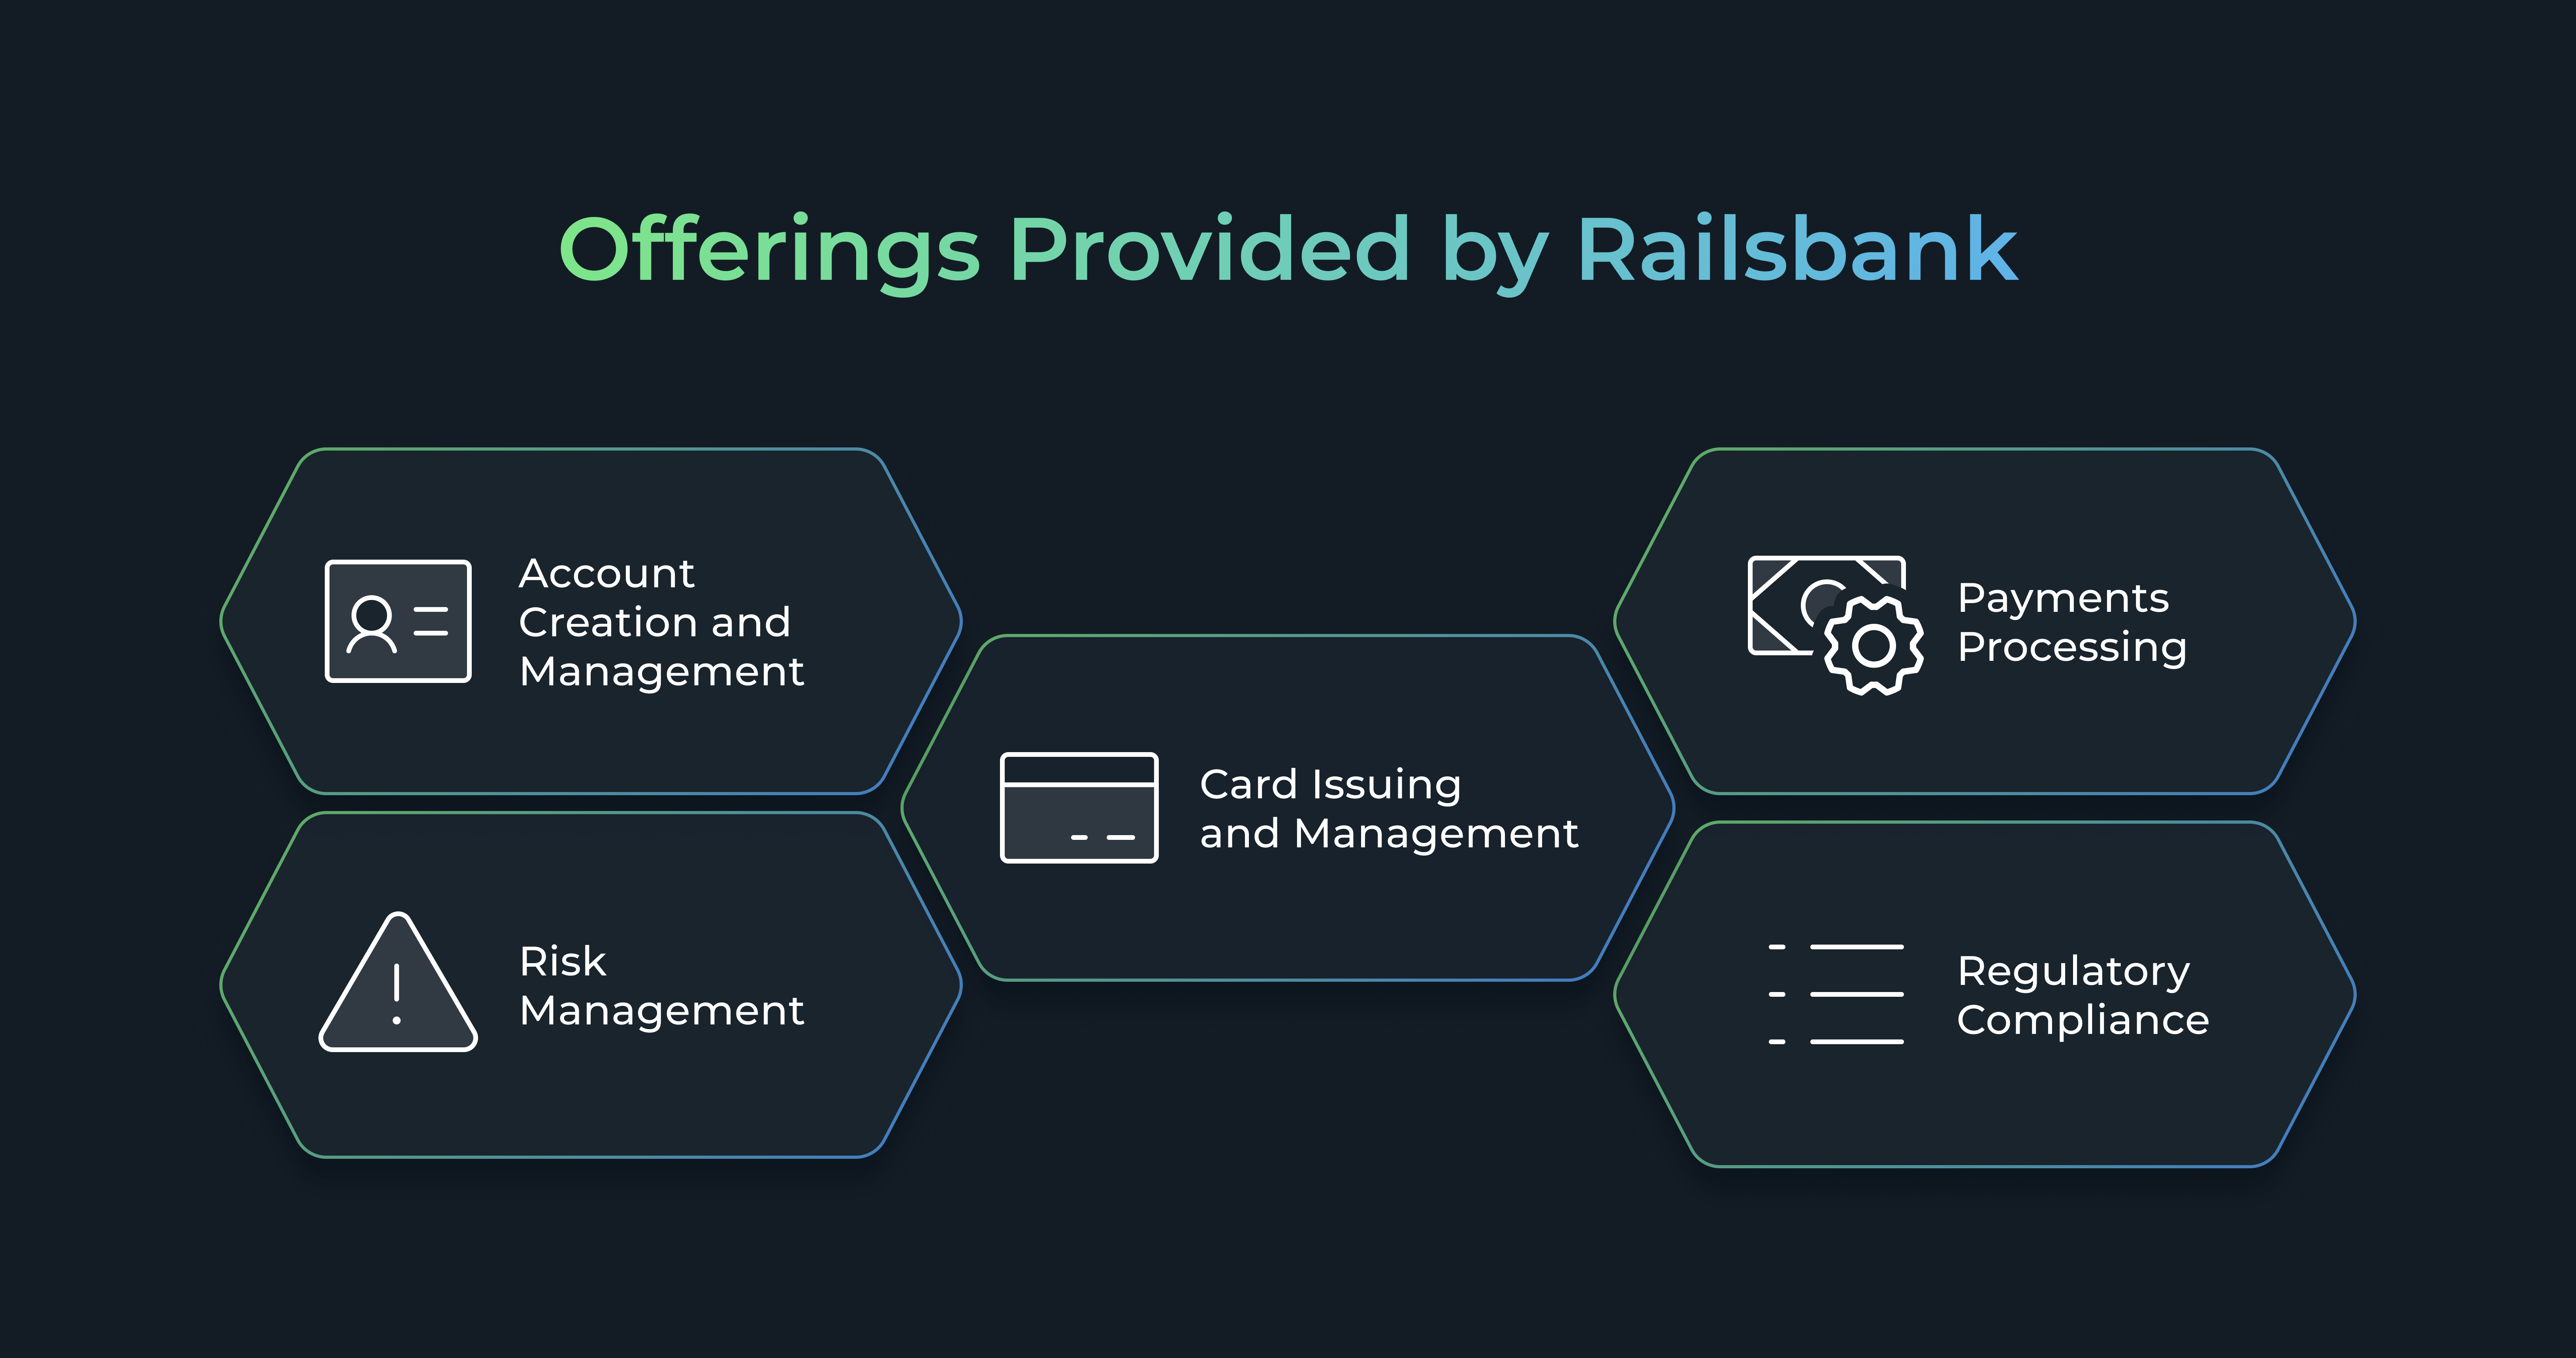 Offerings Provided by Railsbank: Account Creation and Management, Card Issuing and Management, Payments Processing, Regulatory Compliance, Risk Management
